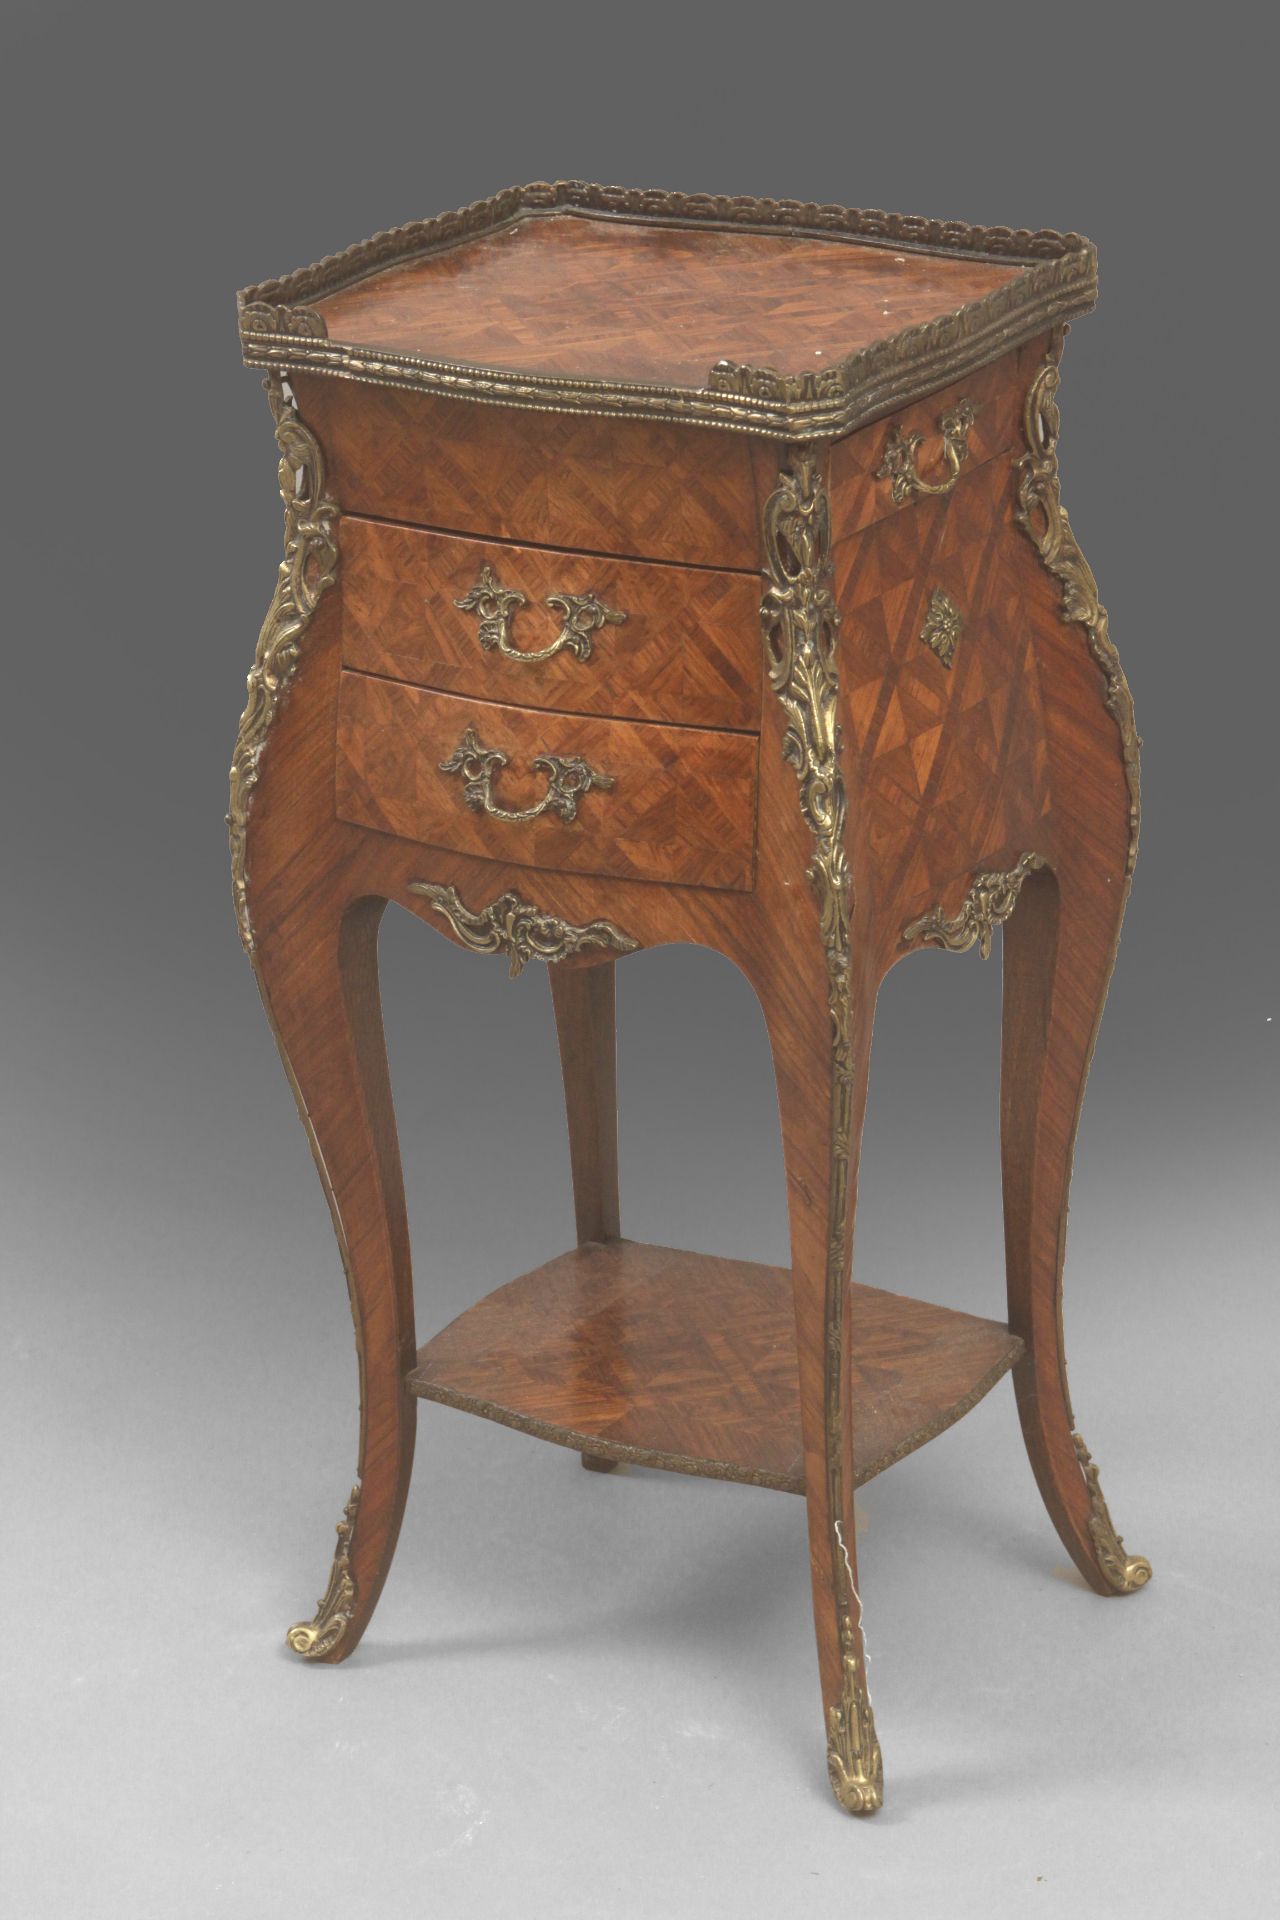 A 19th century French Napoleon III side table